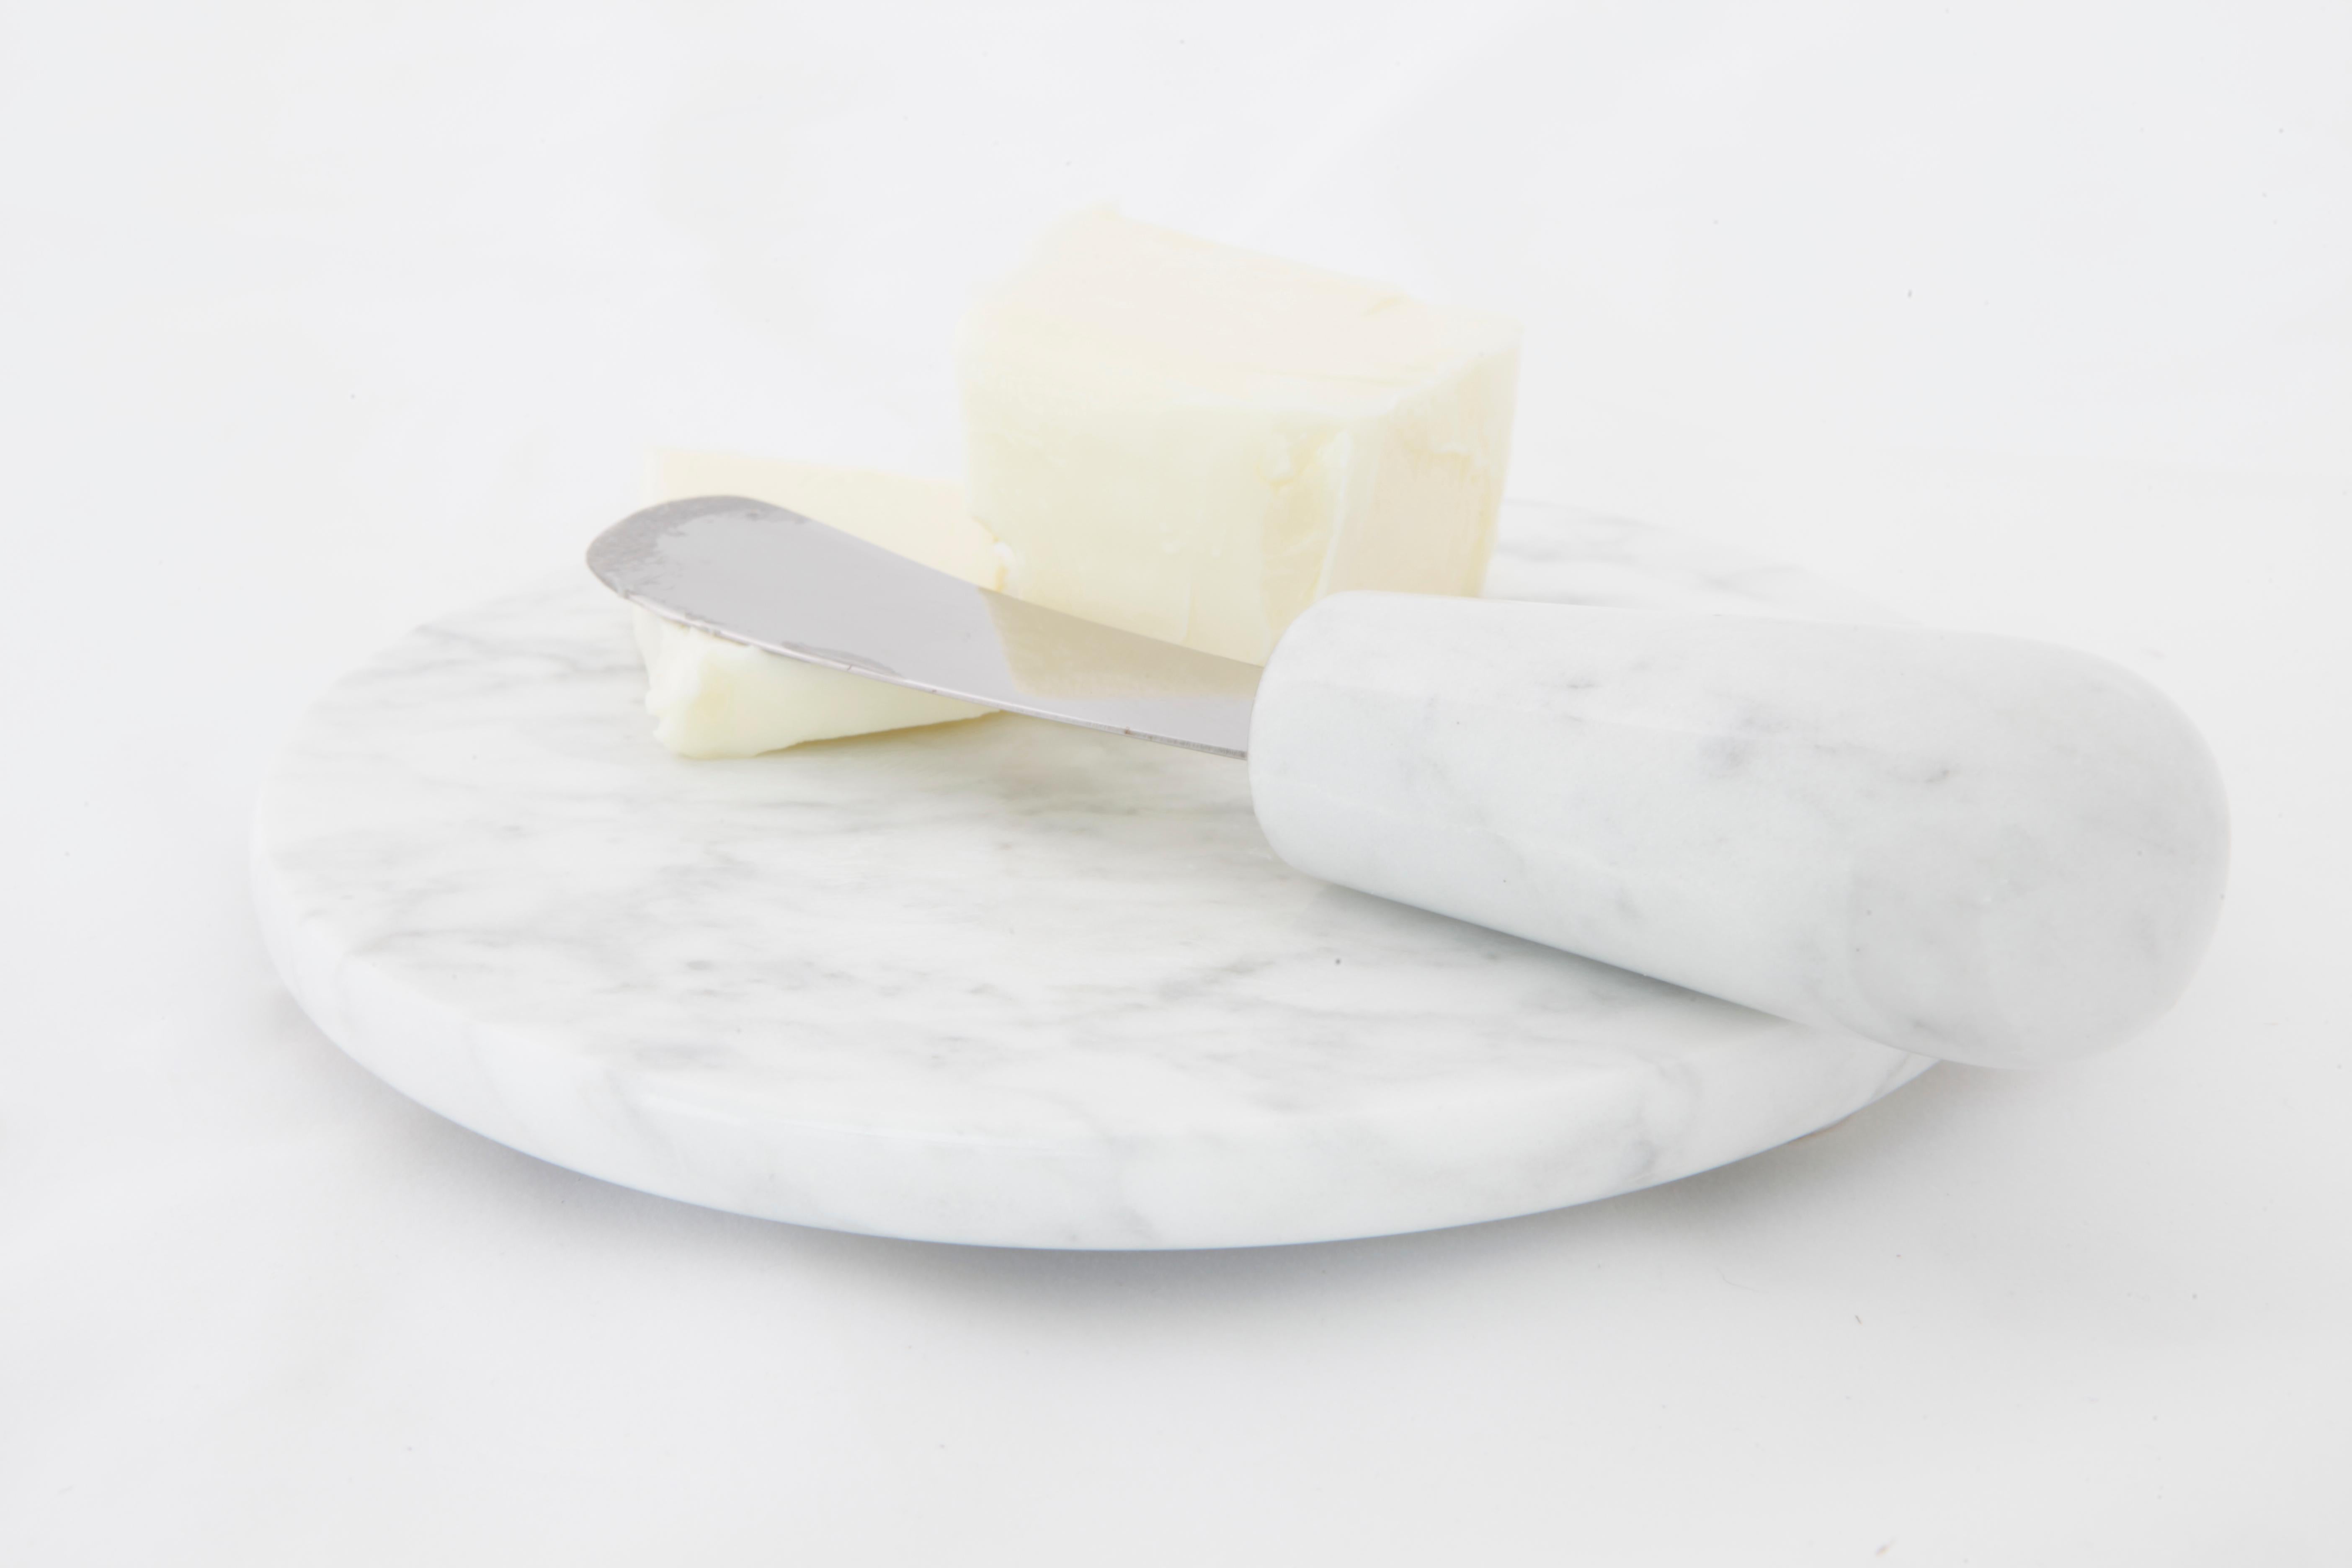 Butter knife and plate in white Carrara marble.
Each piece is in a way unique (every marble block is different in veins and shades) and handmade by Italian artisans specialized over generations in processing marble. Slight variations in shape, color